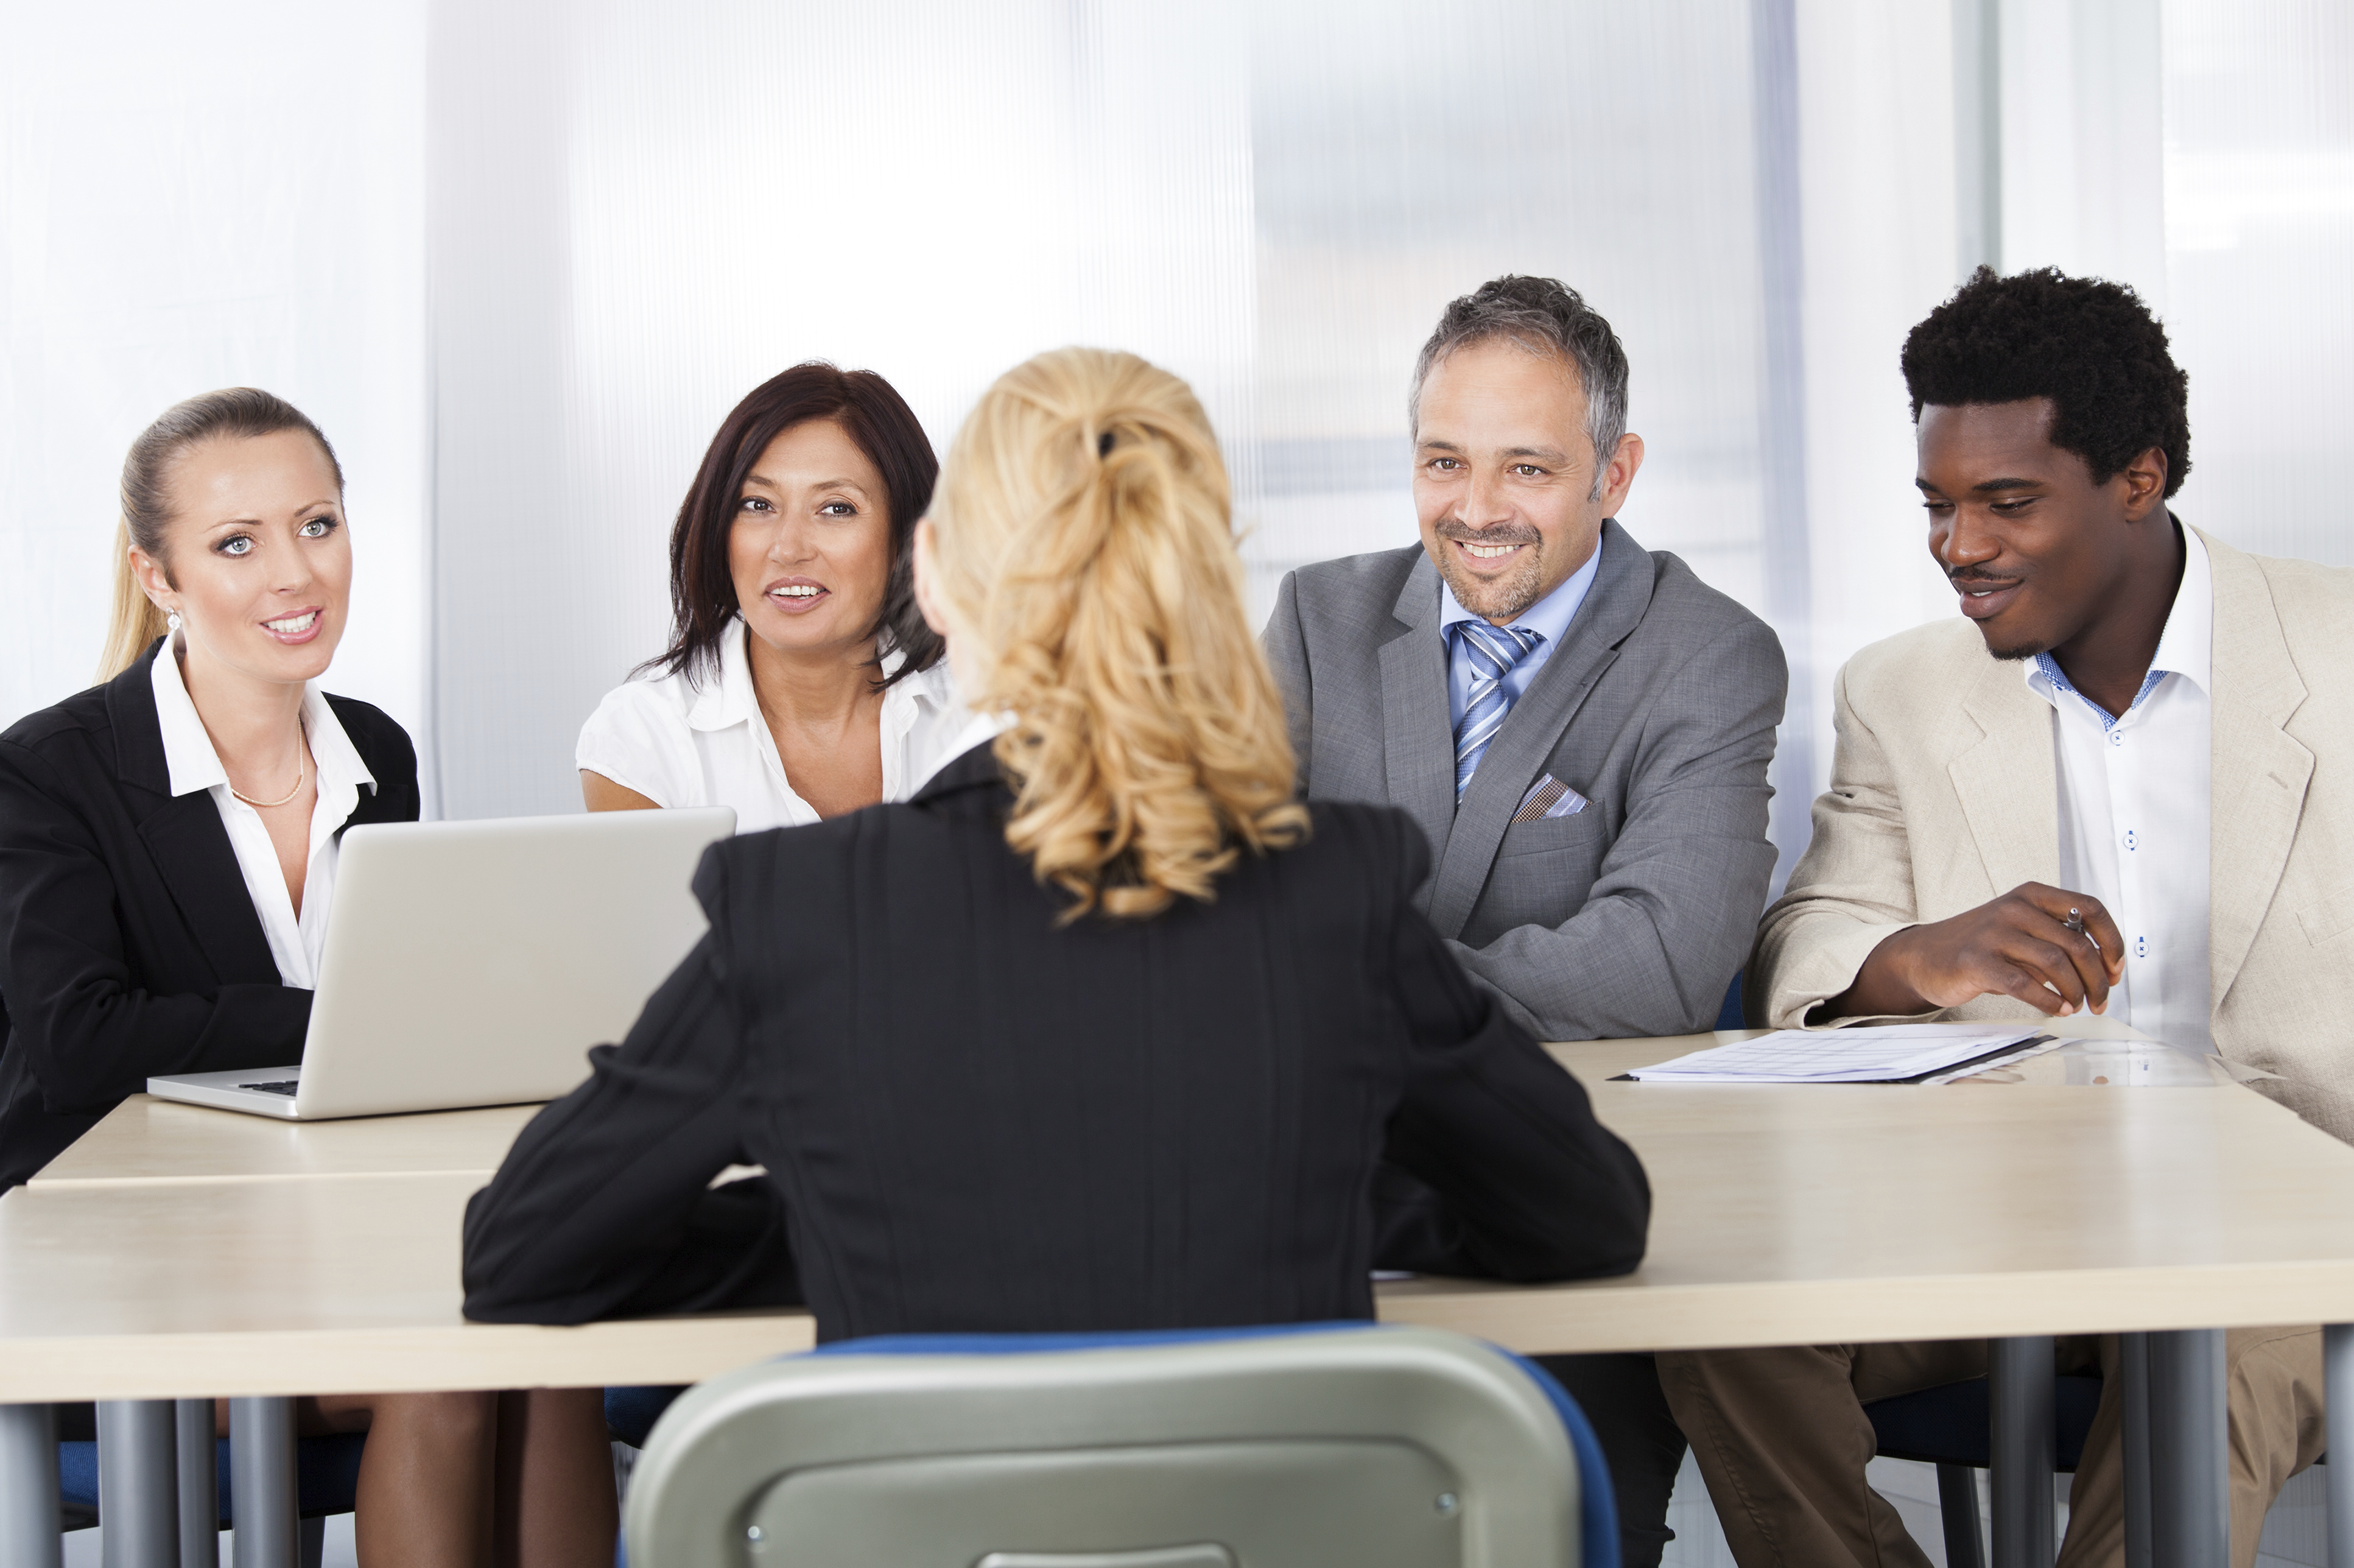 Group Interviewing Tips 32